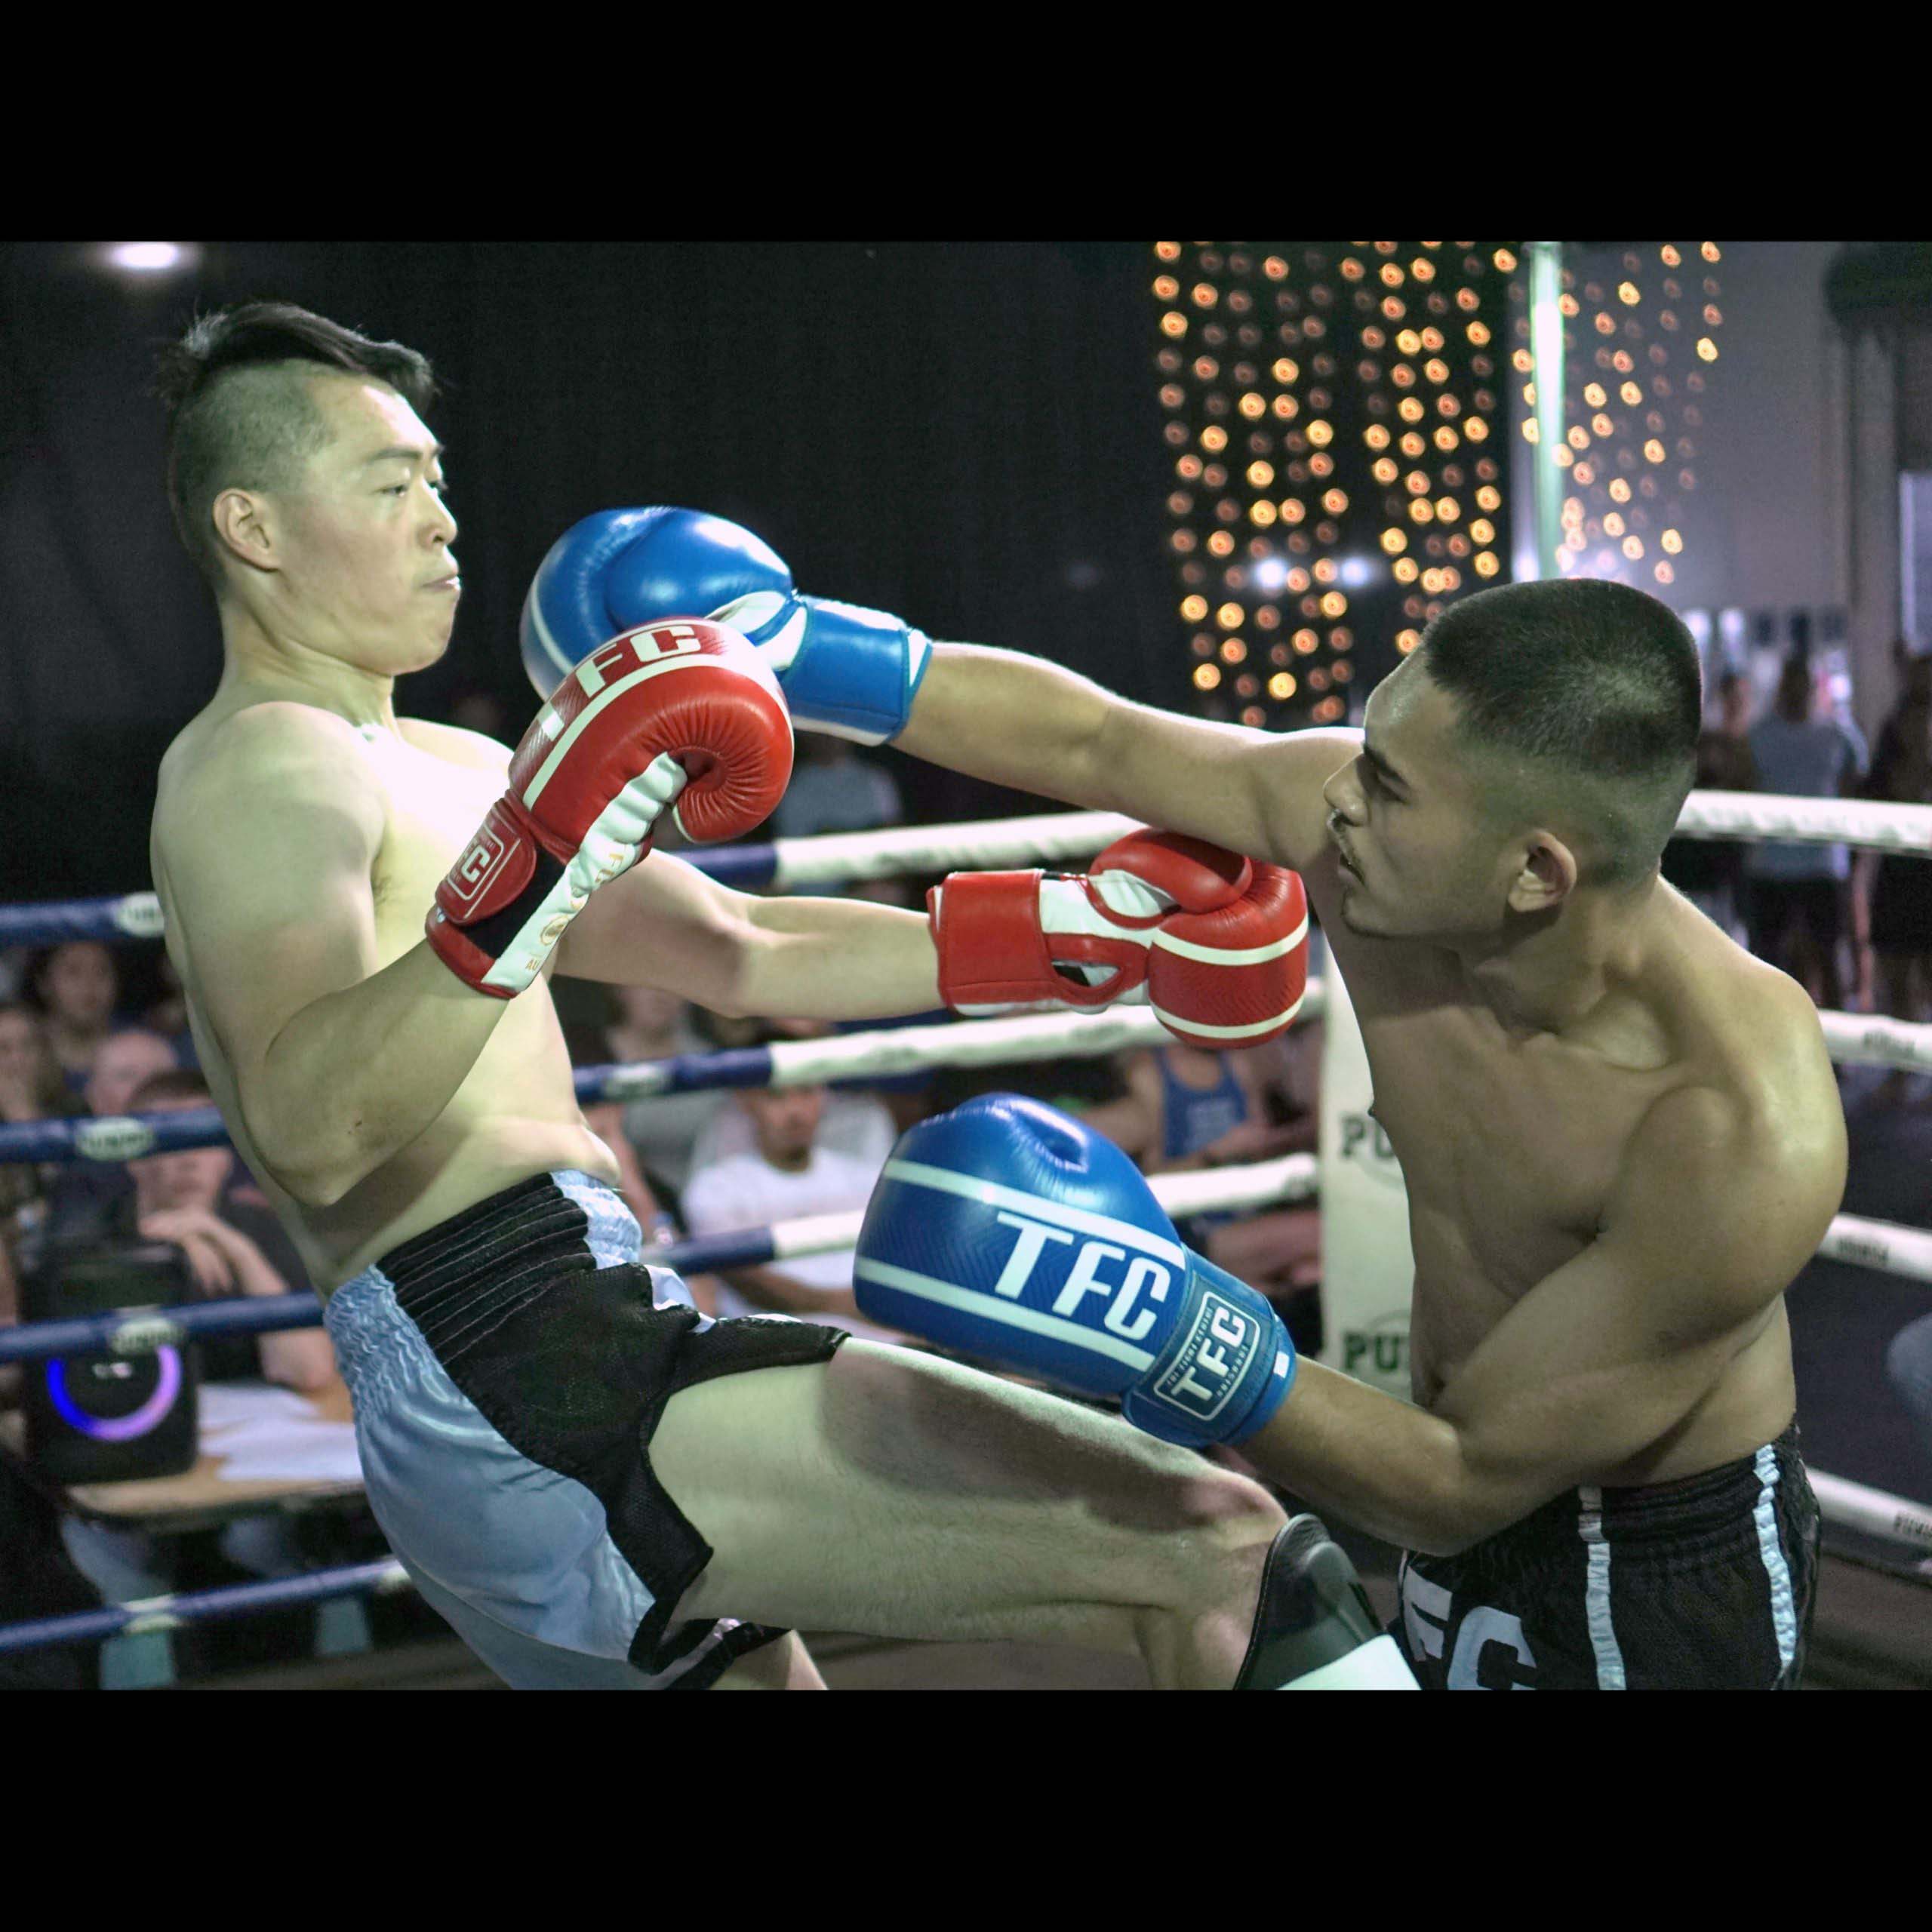 The fight night kicked off with 2 Muay Thai fighters contesting a heated battle